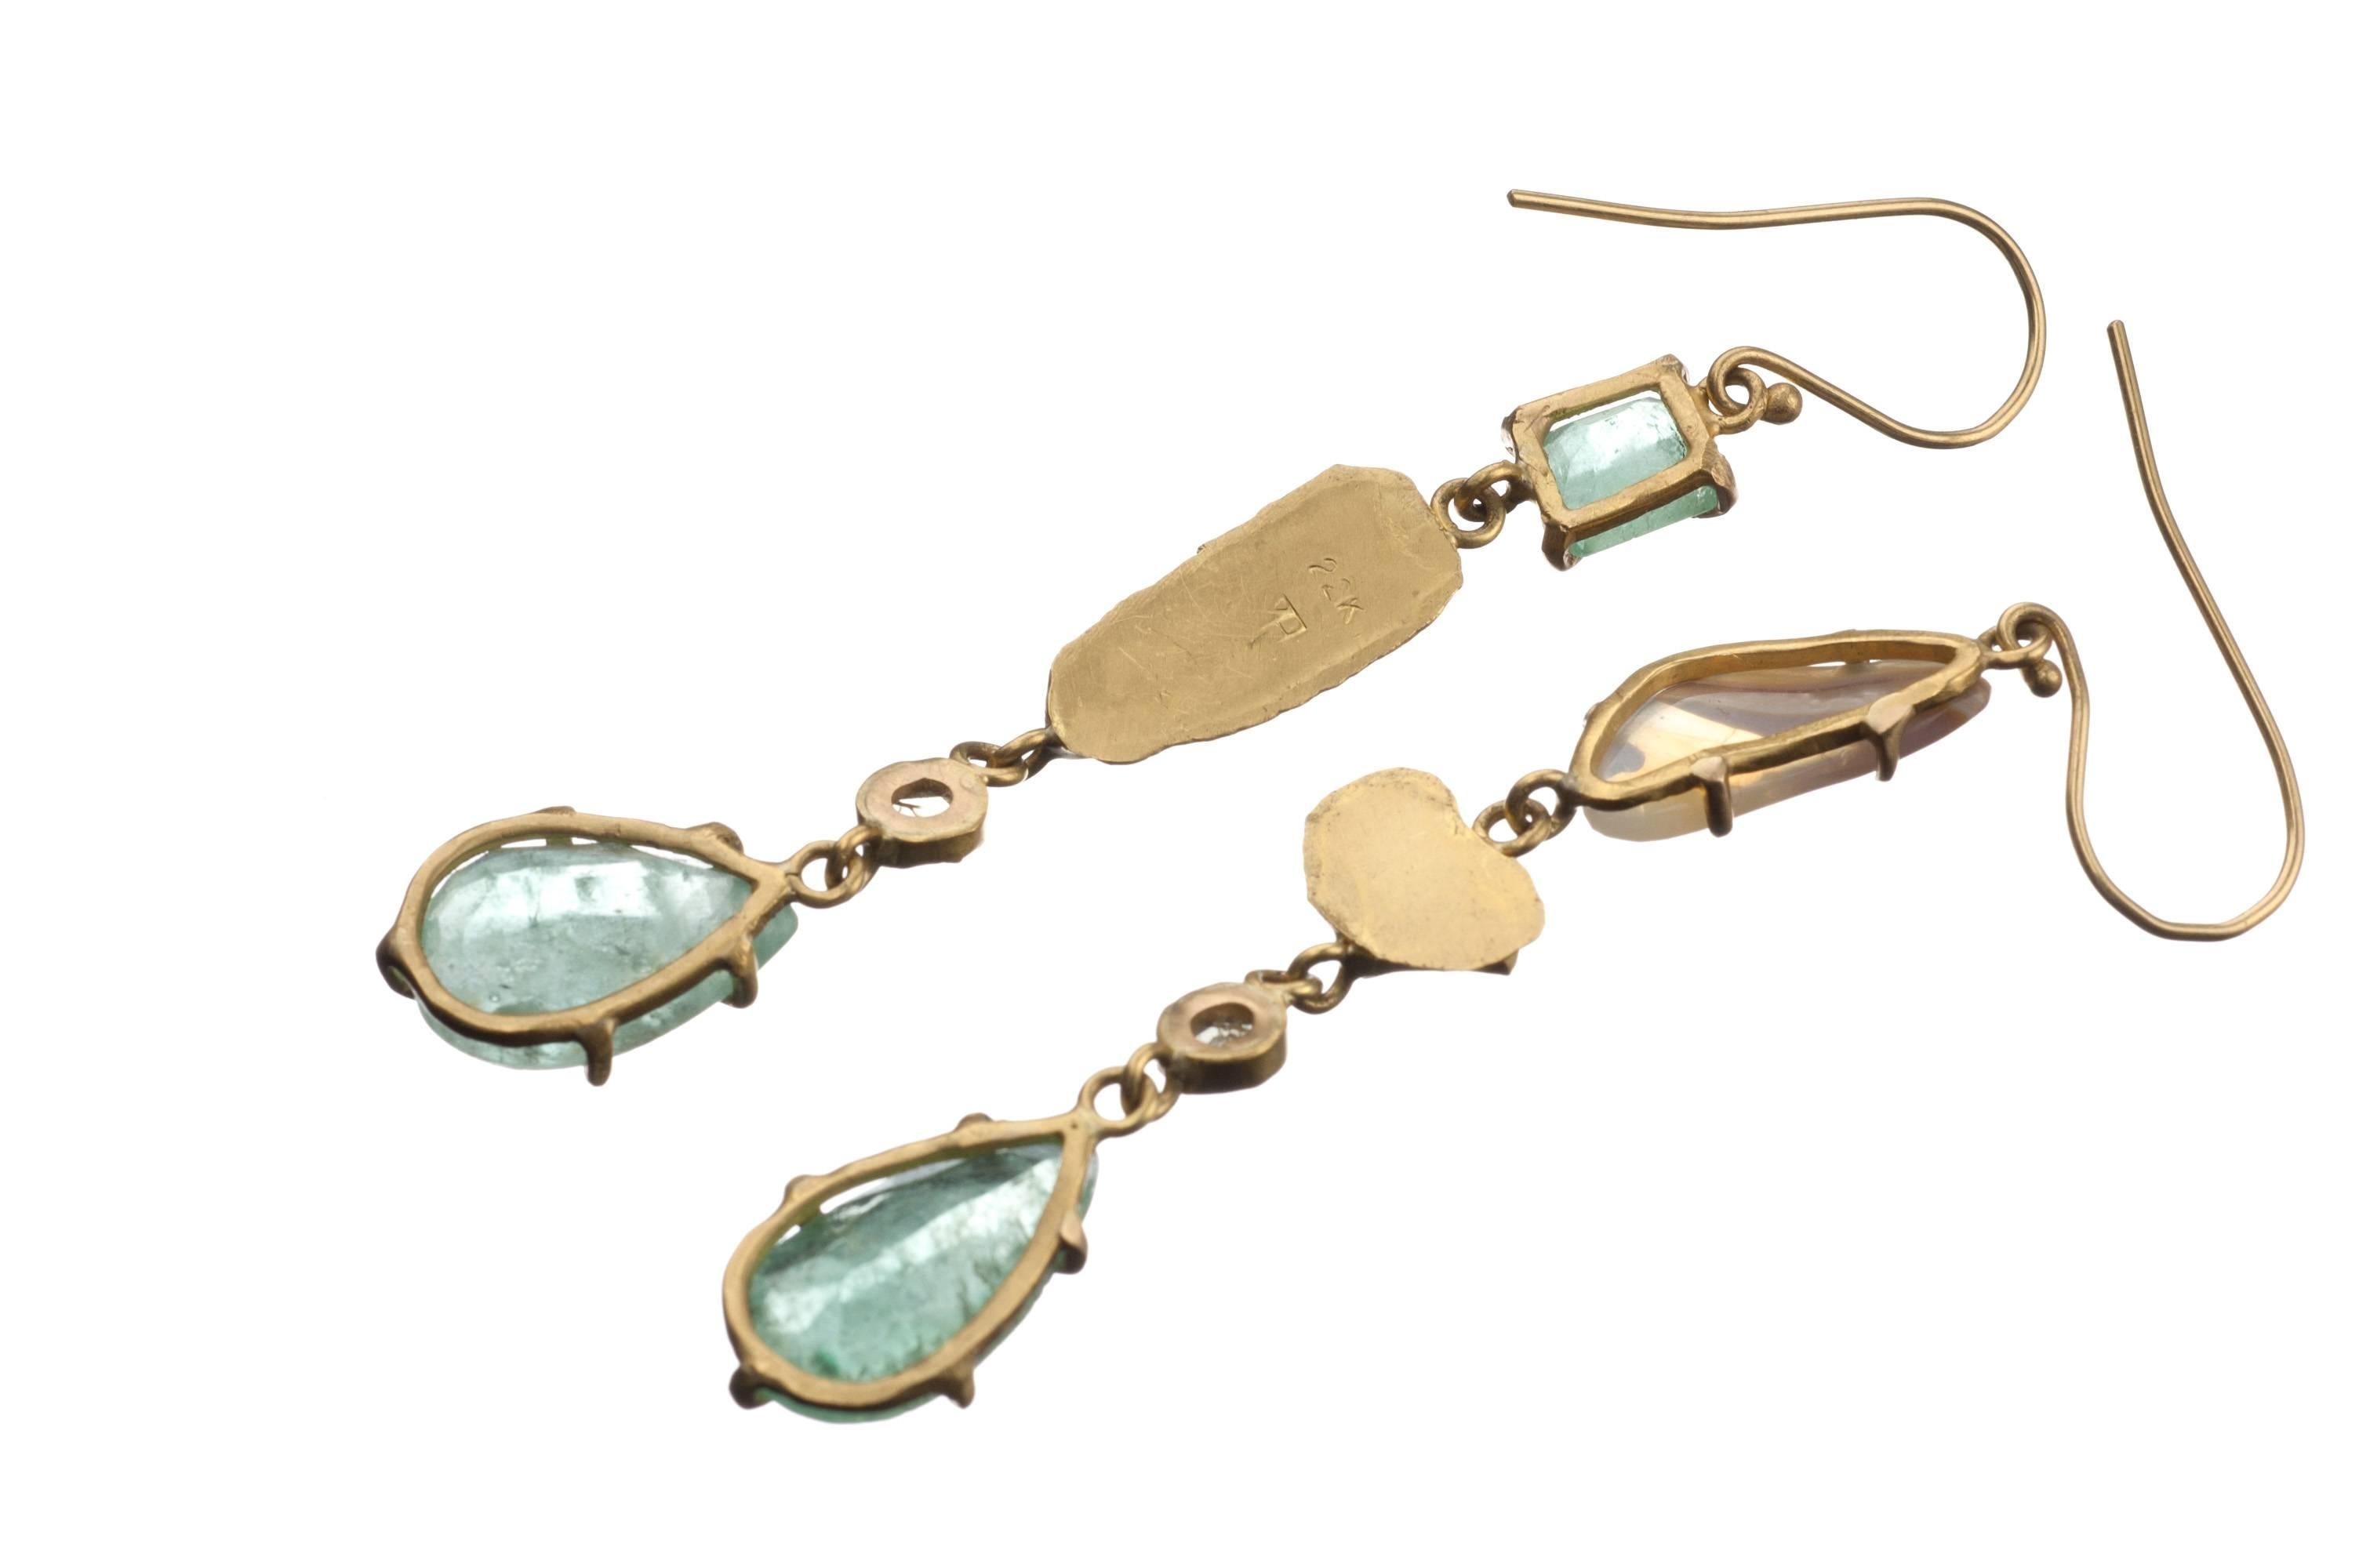 Drop earrings handmade from recycled 22-karat gold by designer Margery Hirschey feature an asymmetric mix of enchanting gemstones. Pear- and emerald-cut emeralds and boulder opals are set in prong and bezel mountings and are finished with two